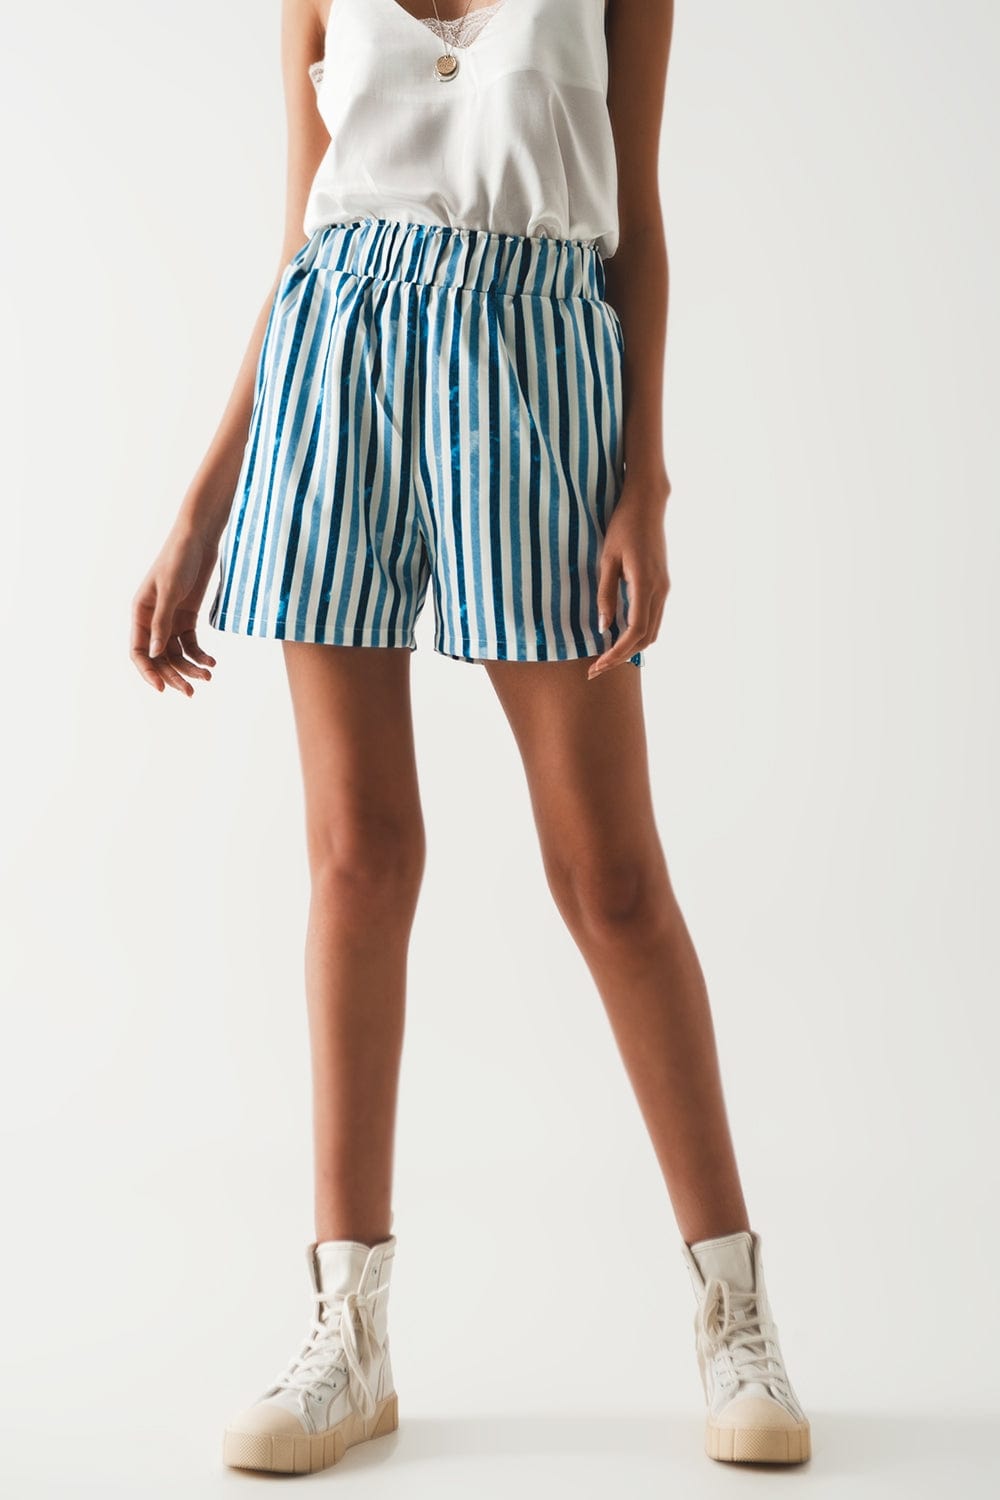 Q2 Women's Shorts Shorts with Elastic Waist in Blue Stripes